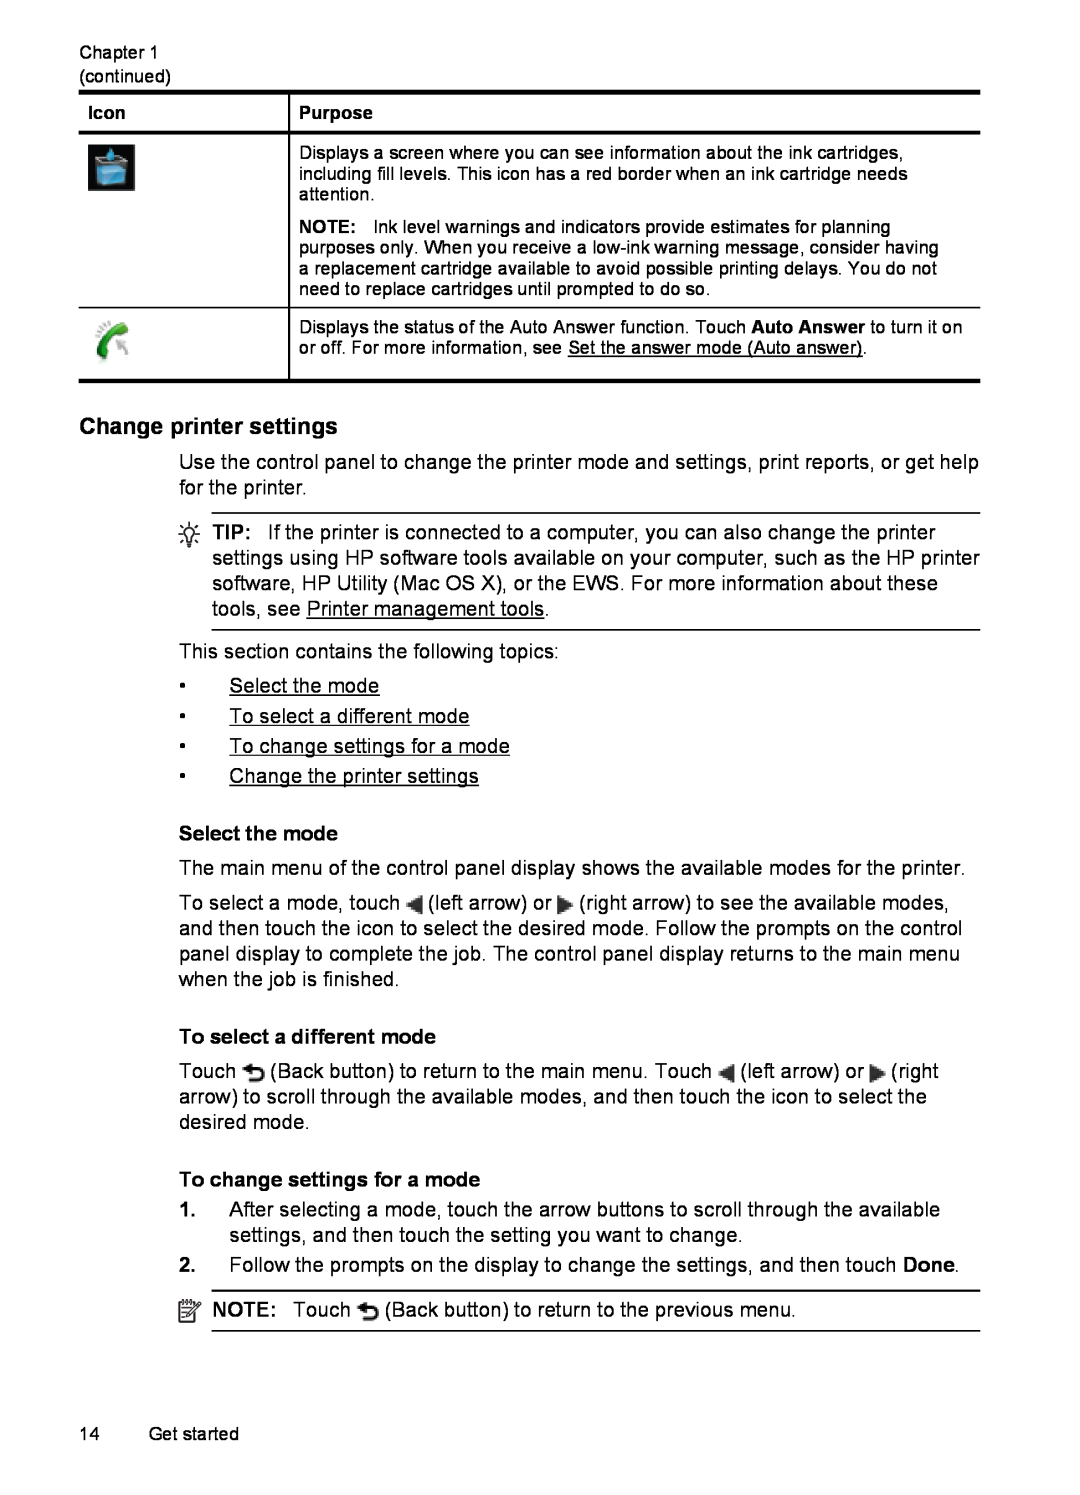 HP 6600 - H7 manual Change printer settings, Select the mode, To select a different mode, To change settings for a mode 